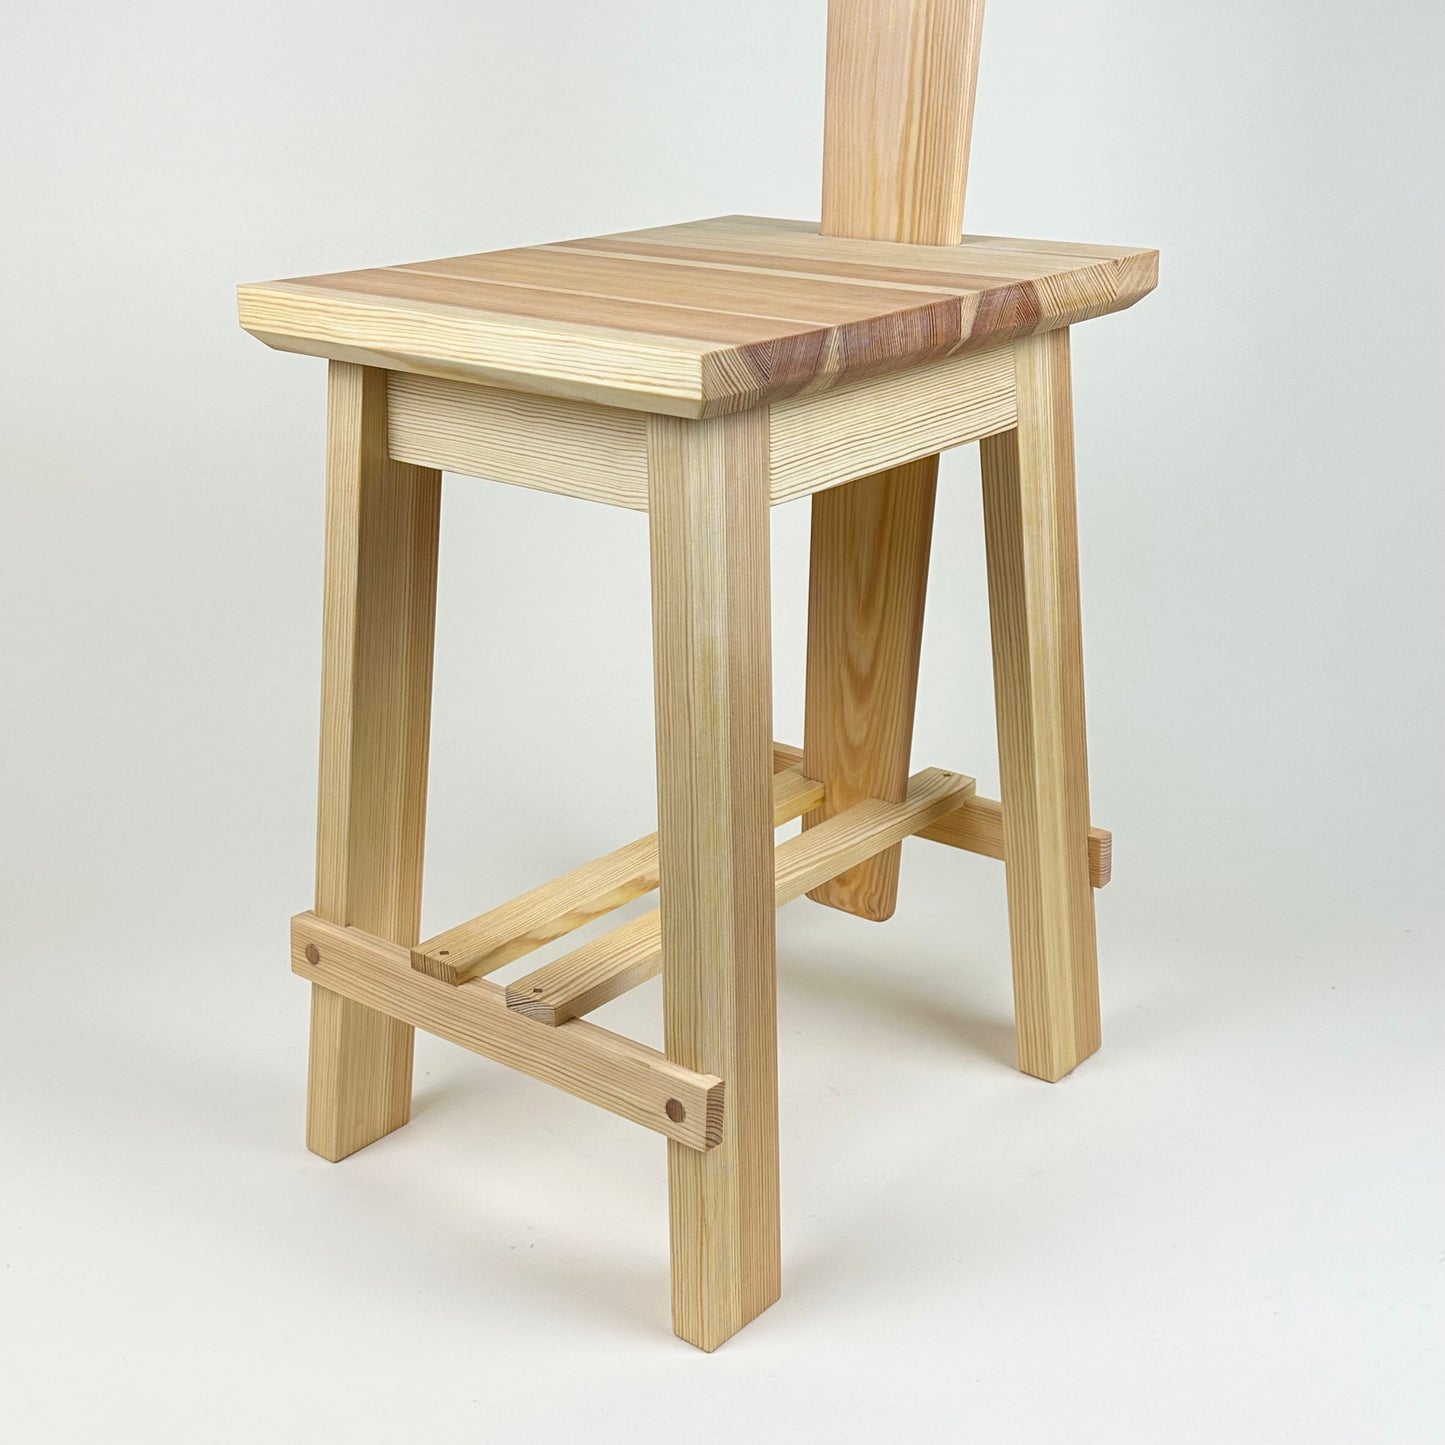 Handmade wooden chair by Pål Rodenius